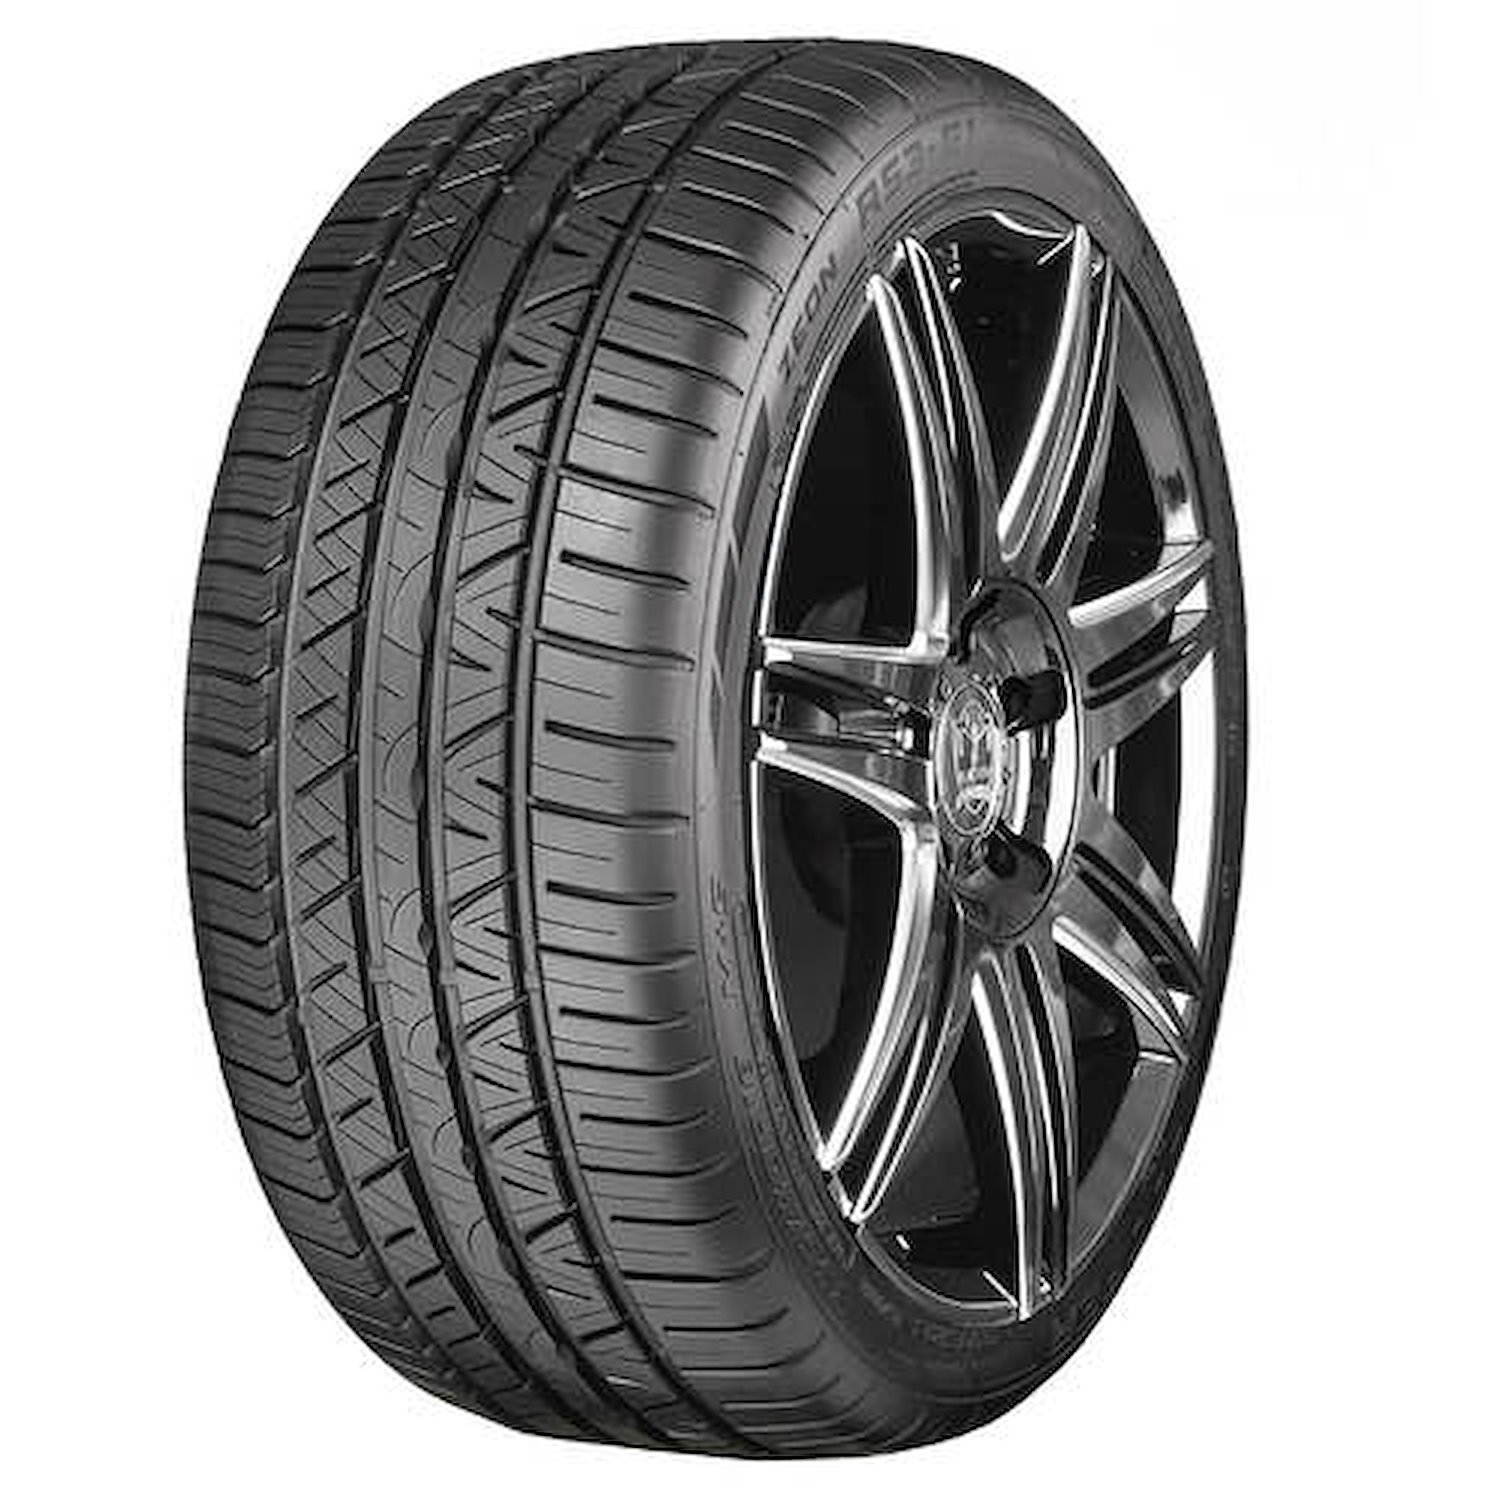 Zeon RS3-G1 High-Performance Tire, 255/45R20